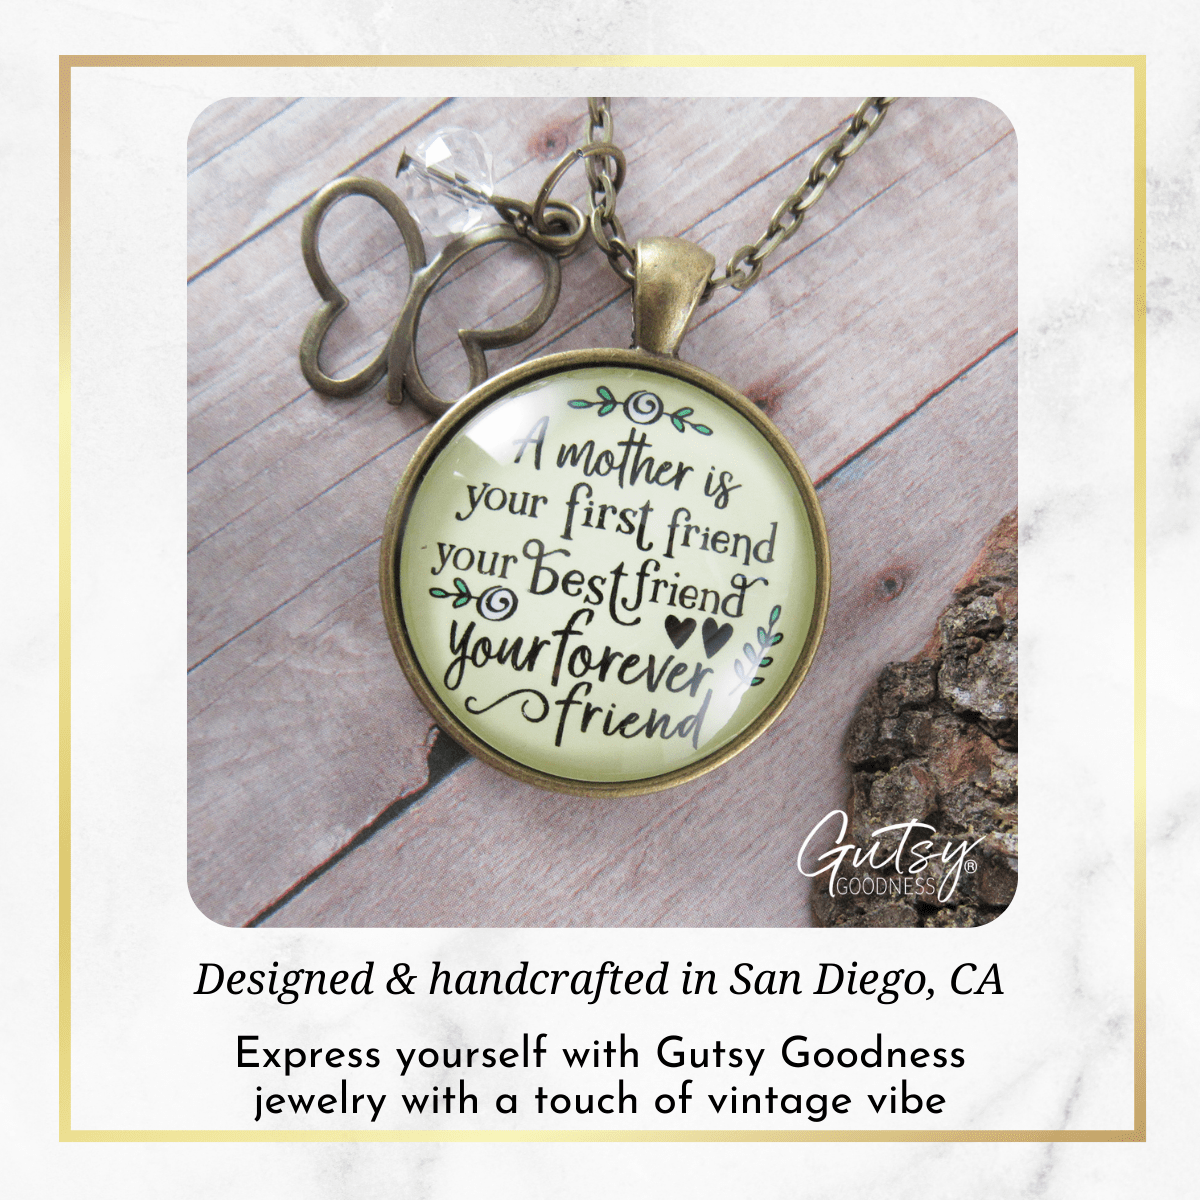 Gutsy Goodness Mother is First Friend Necklace BFF Word Quote Vintage Jewelry Gift - Gutsy Goodness Handmade Jewelry;Mother Is First Friend Necklace Bff Word Quote Vintage Jewelry Gift - Gutsy Goodness Handmade Jewelry Gifts